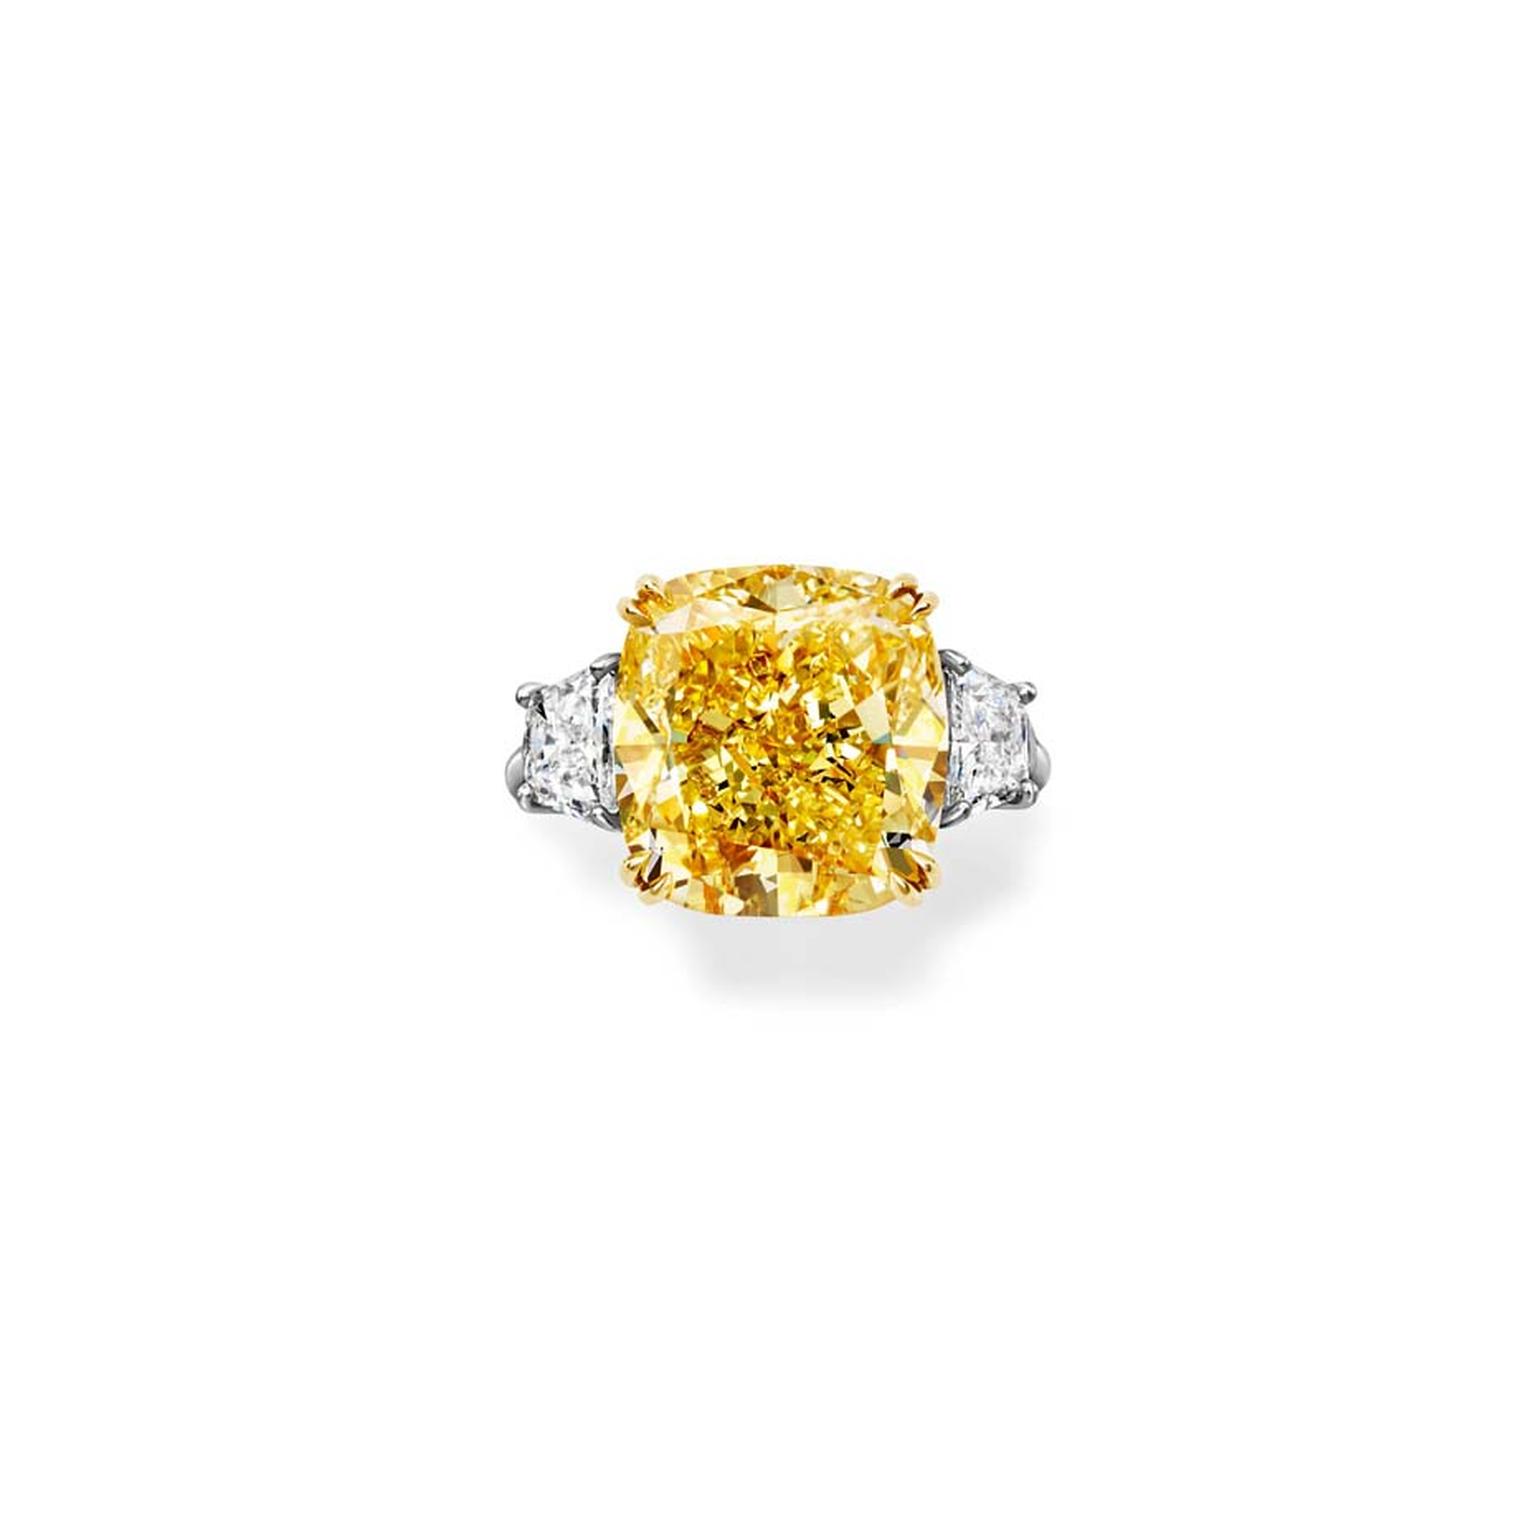 Harry Winston Classic Winston emerald-cut yellow diamond engagement ring in platinum with two brilliant-shaped diamond side stones.